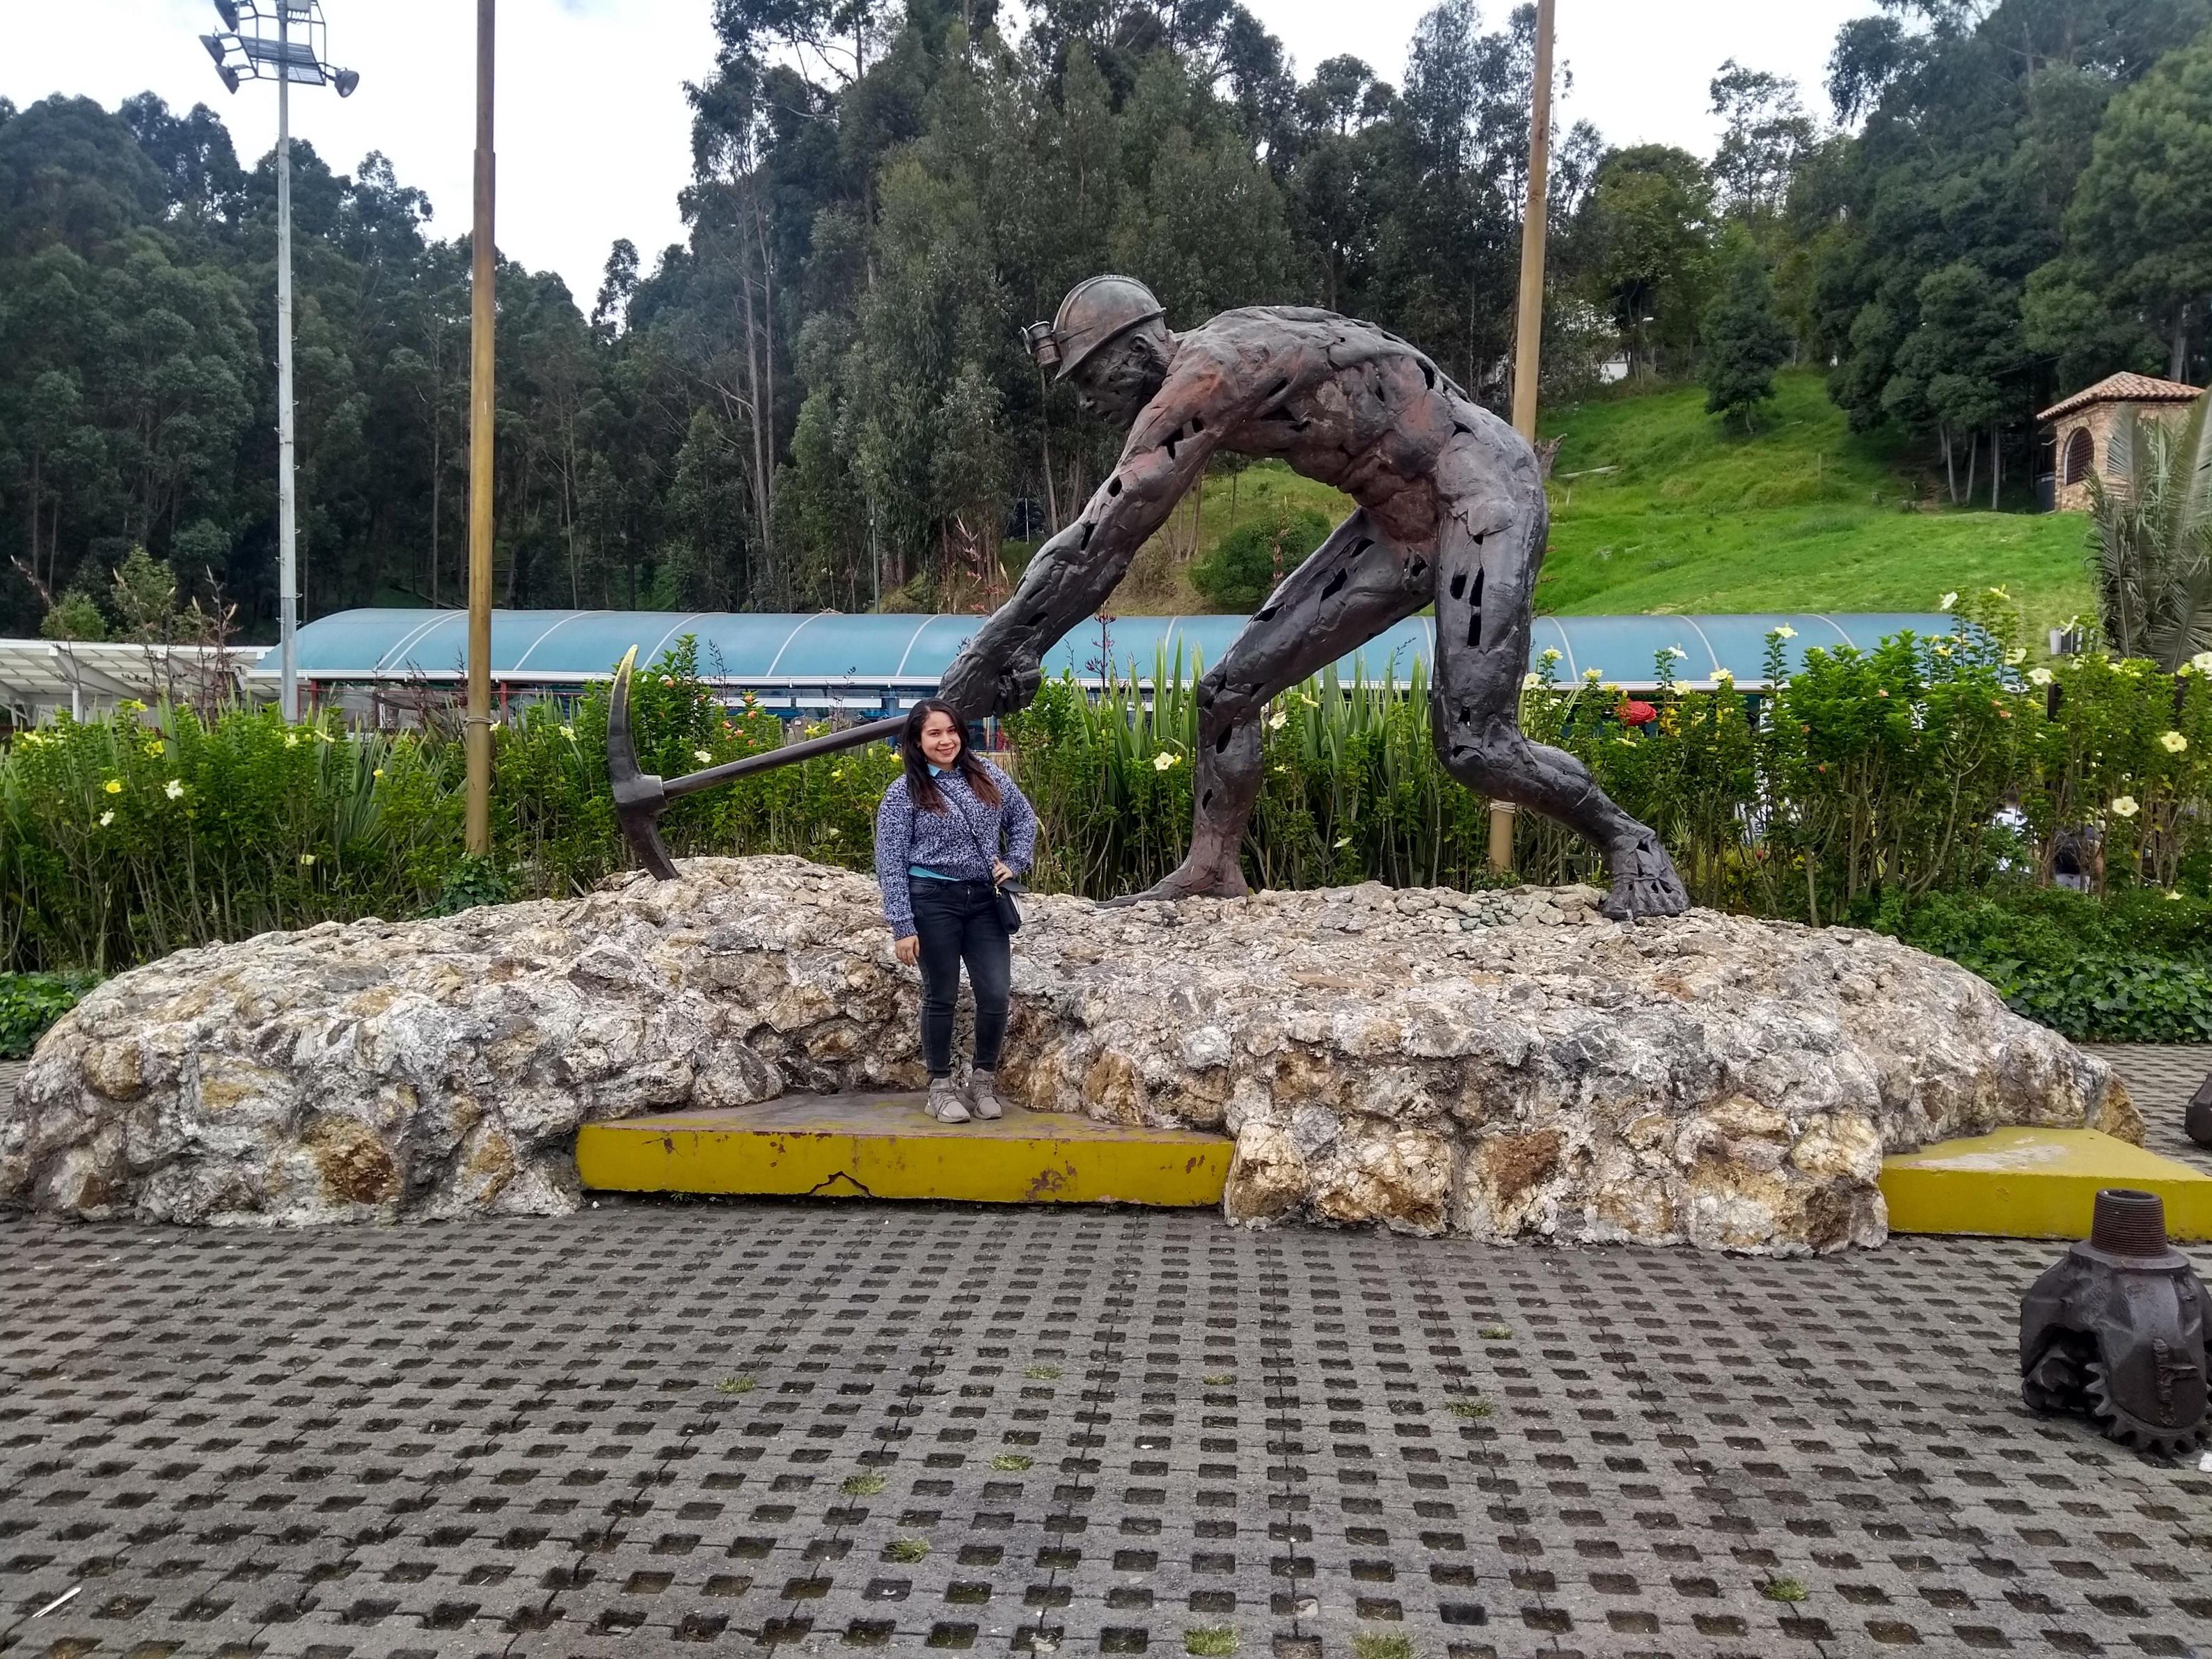 With the Salt Miner - Zipaquira, Colombia